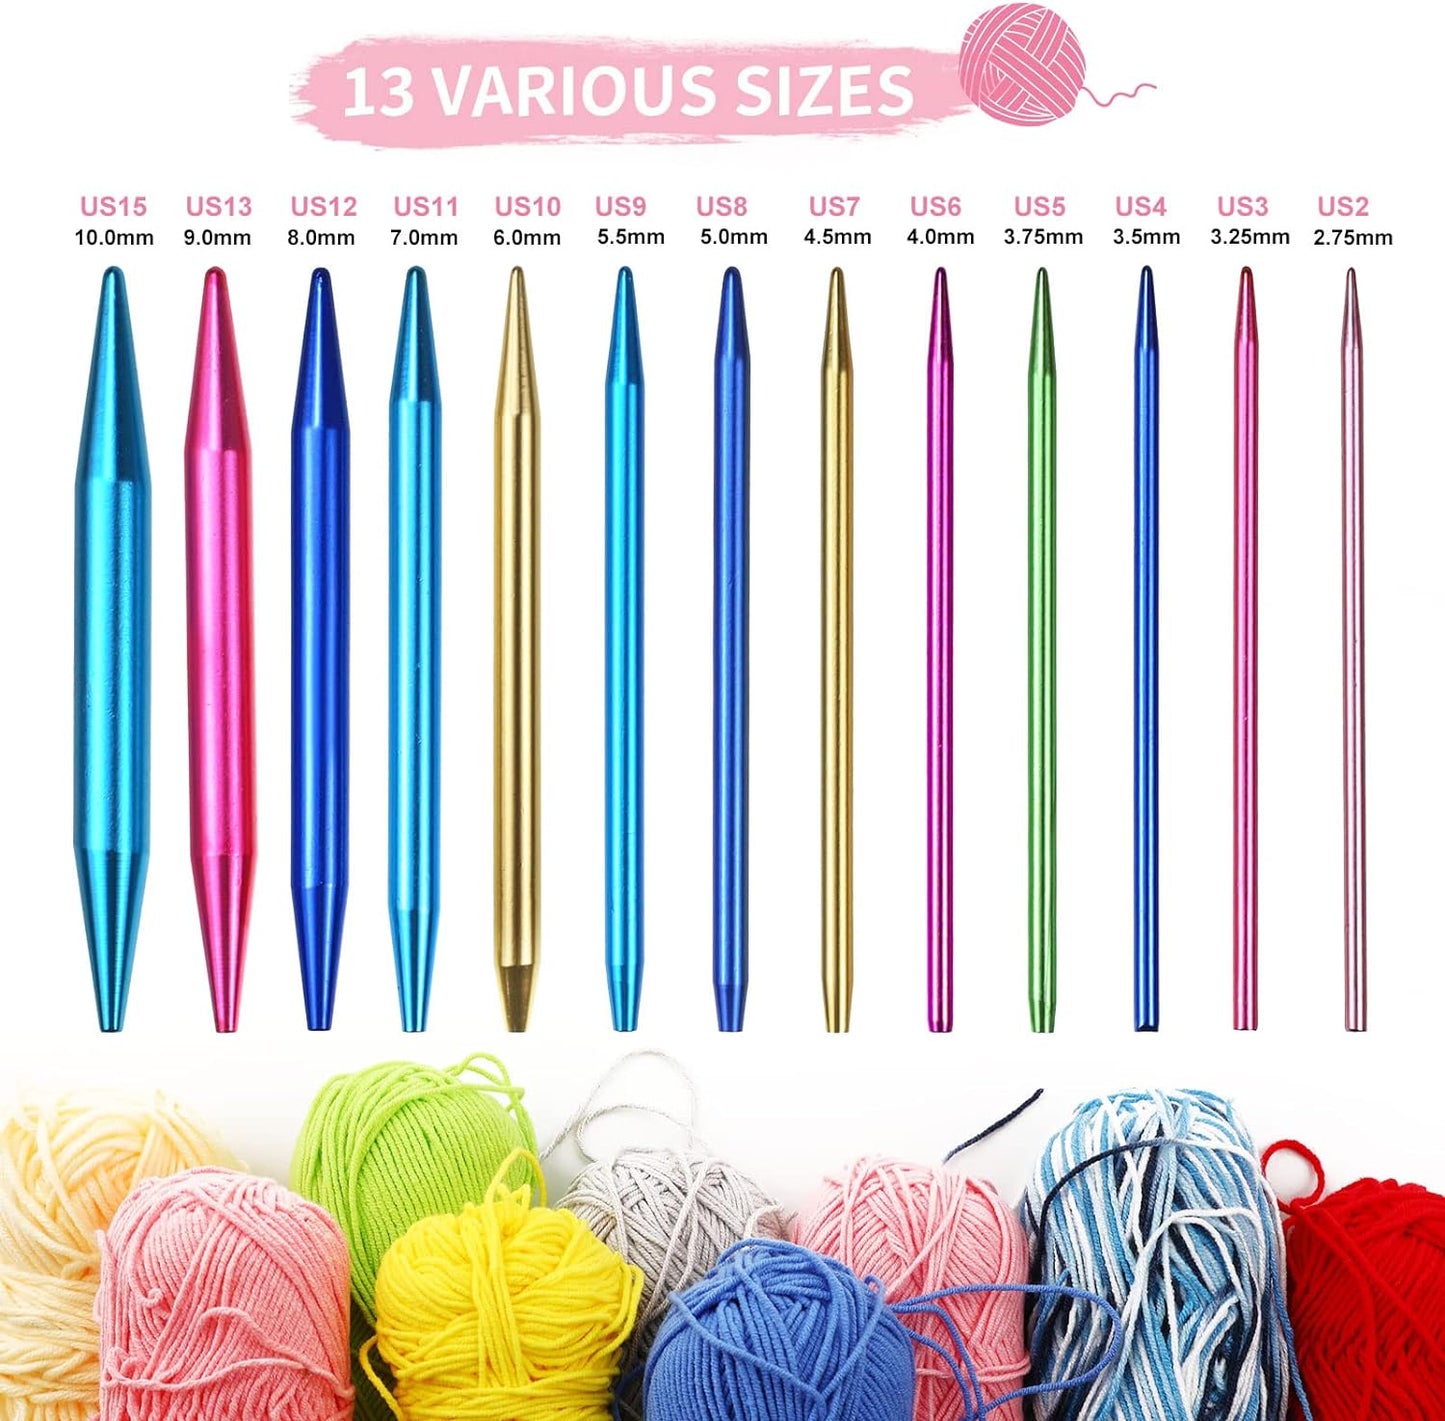 57Pcs Aluminum Circular Knitting Needles Set with Ergonomic Handles,13 Size Interchangeable Crochet Needles with Storage Case for Small Project (Style 1)